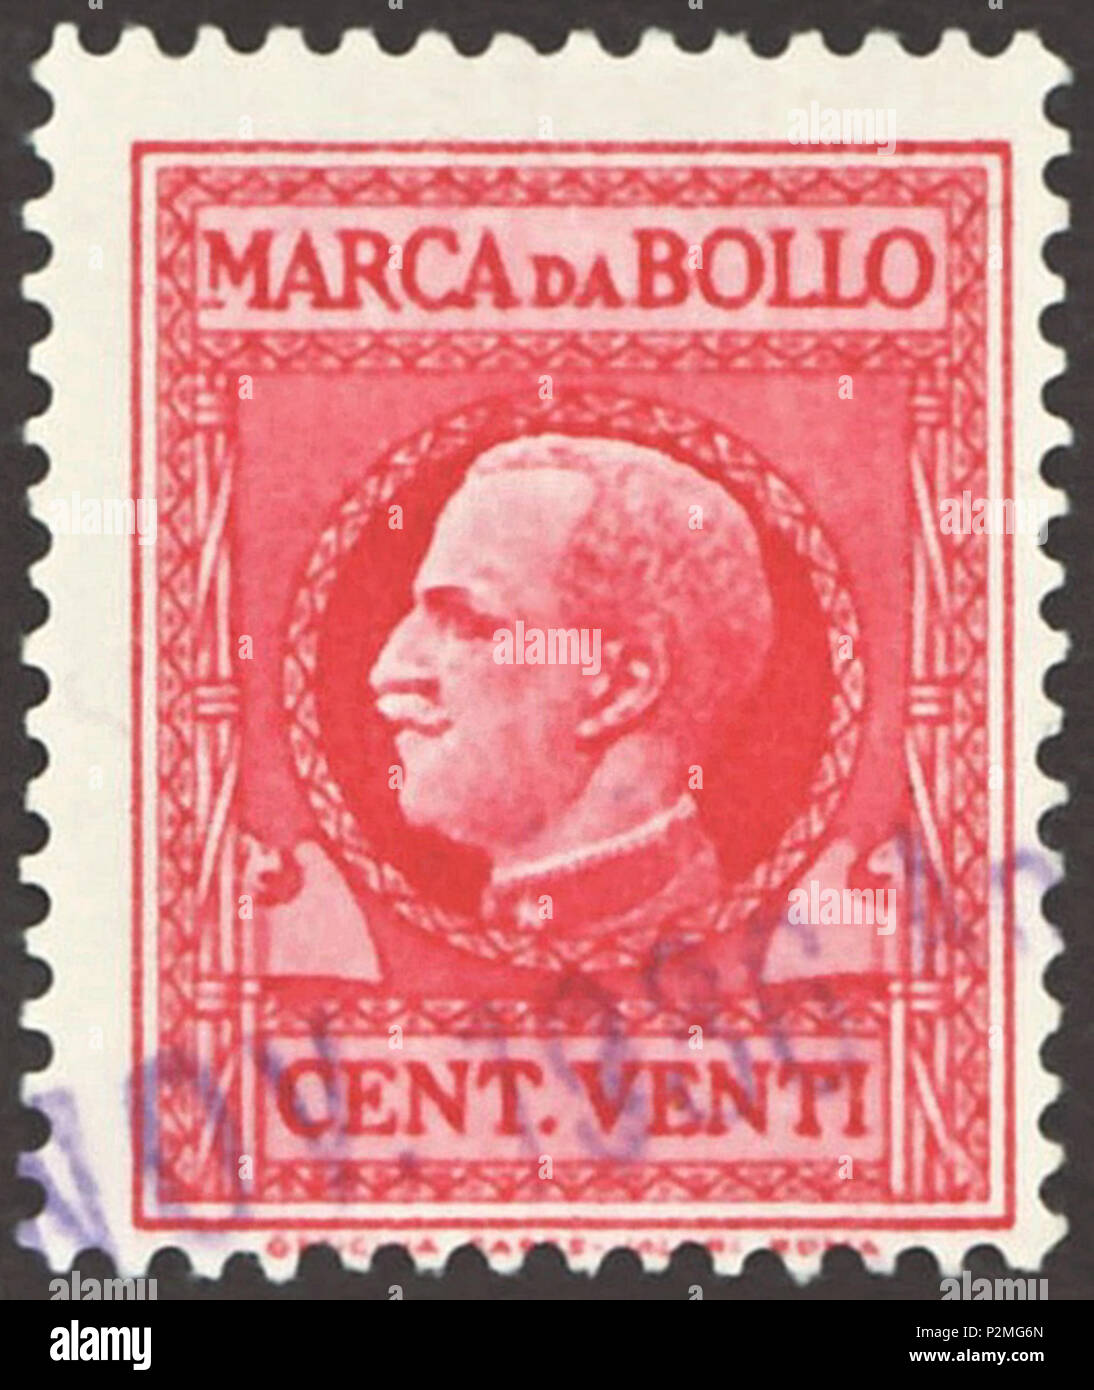 . Stamp of the Kingdom of Italy; 1930; revenue stamp (Italian: 'Marco da Bollo') of the issue 'King Vittorio Emanuele III in circle with view to left'; framed drawing of an effigy of King Victor Emmanuel III of Italy with view to right in an ornamented circle between two 'Fascio' symbols as lateral picture ornaments; nominal value written in letters (not in numbers); general fiscal stamp applicalble for all types of taxes; stamp postmarked in 1936 Stamp: Unificato MB 108 Color: red Watermark: Italy No. 1 (crown) Nominal value: 20 Centesimi ('CENT. VENTI') Postage valdity: from 1930 until 18 Ju Stock Photo